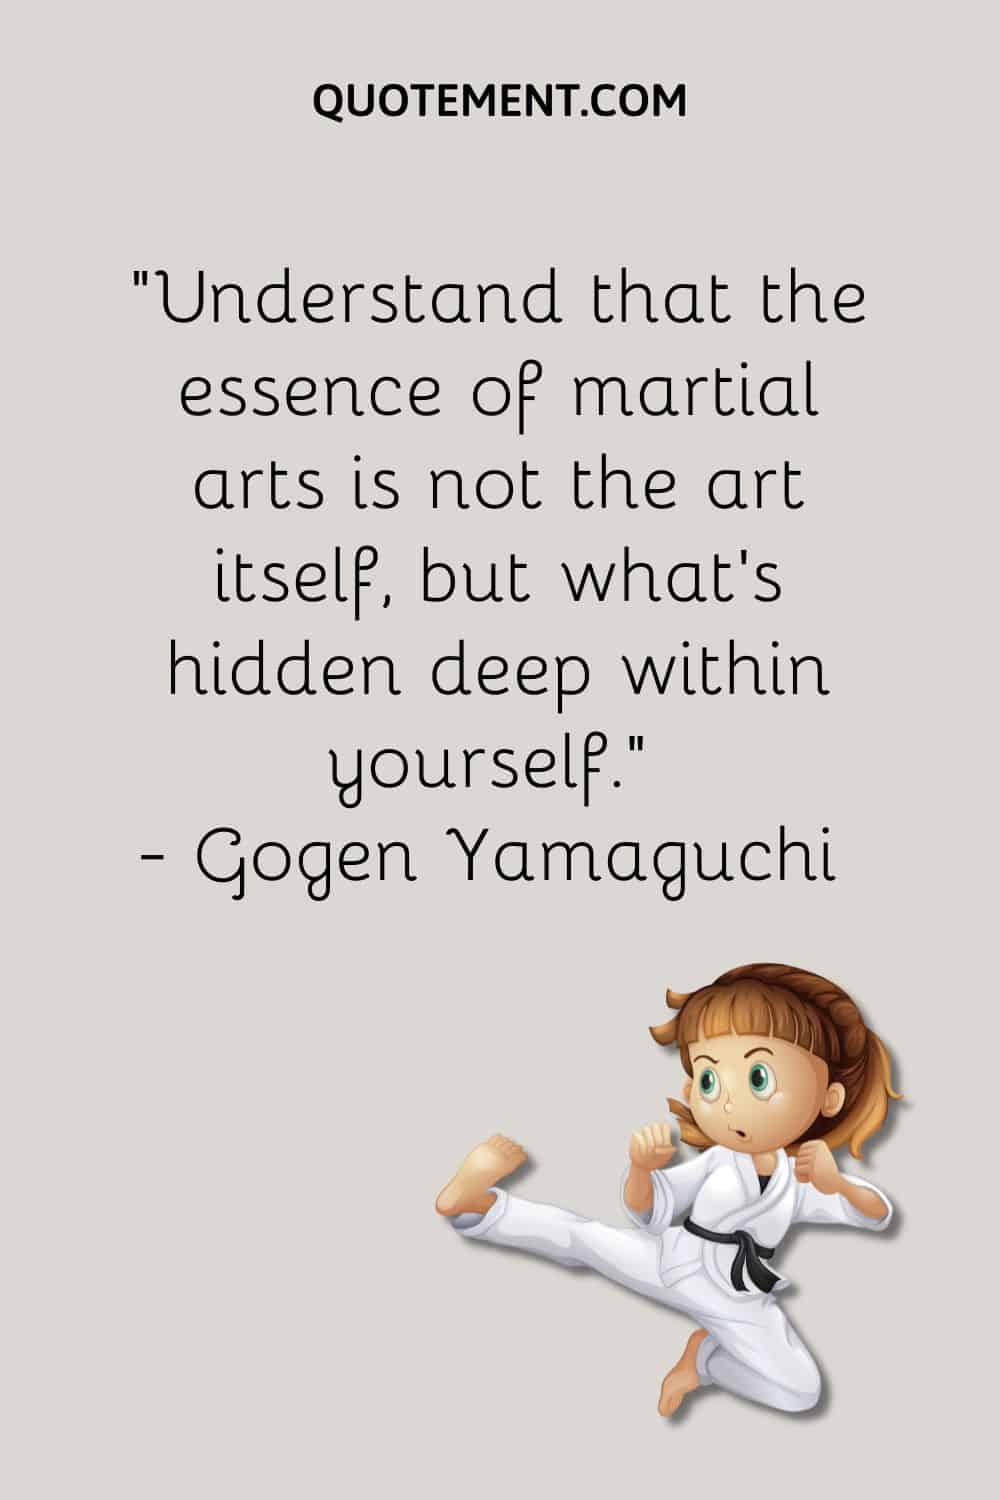 Understand that the essence of martial arts is not the art itself